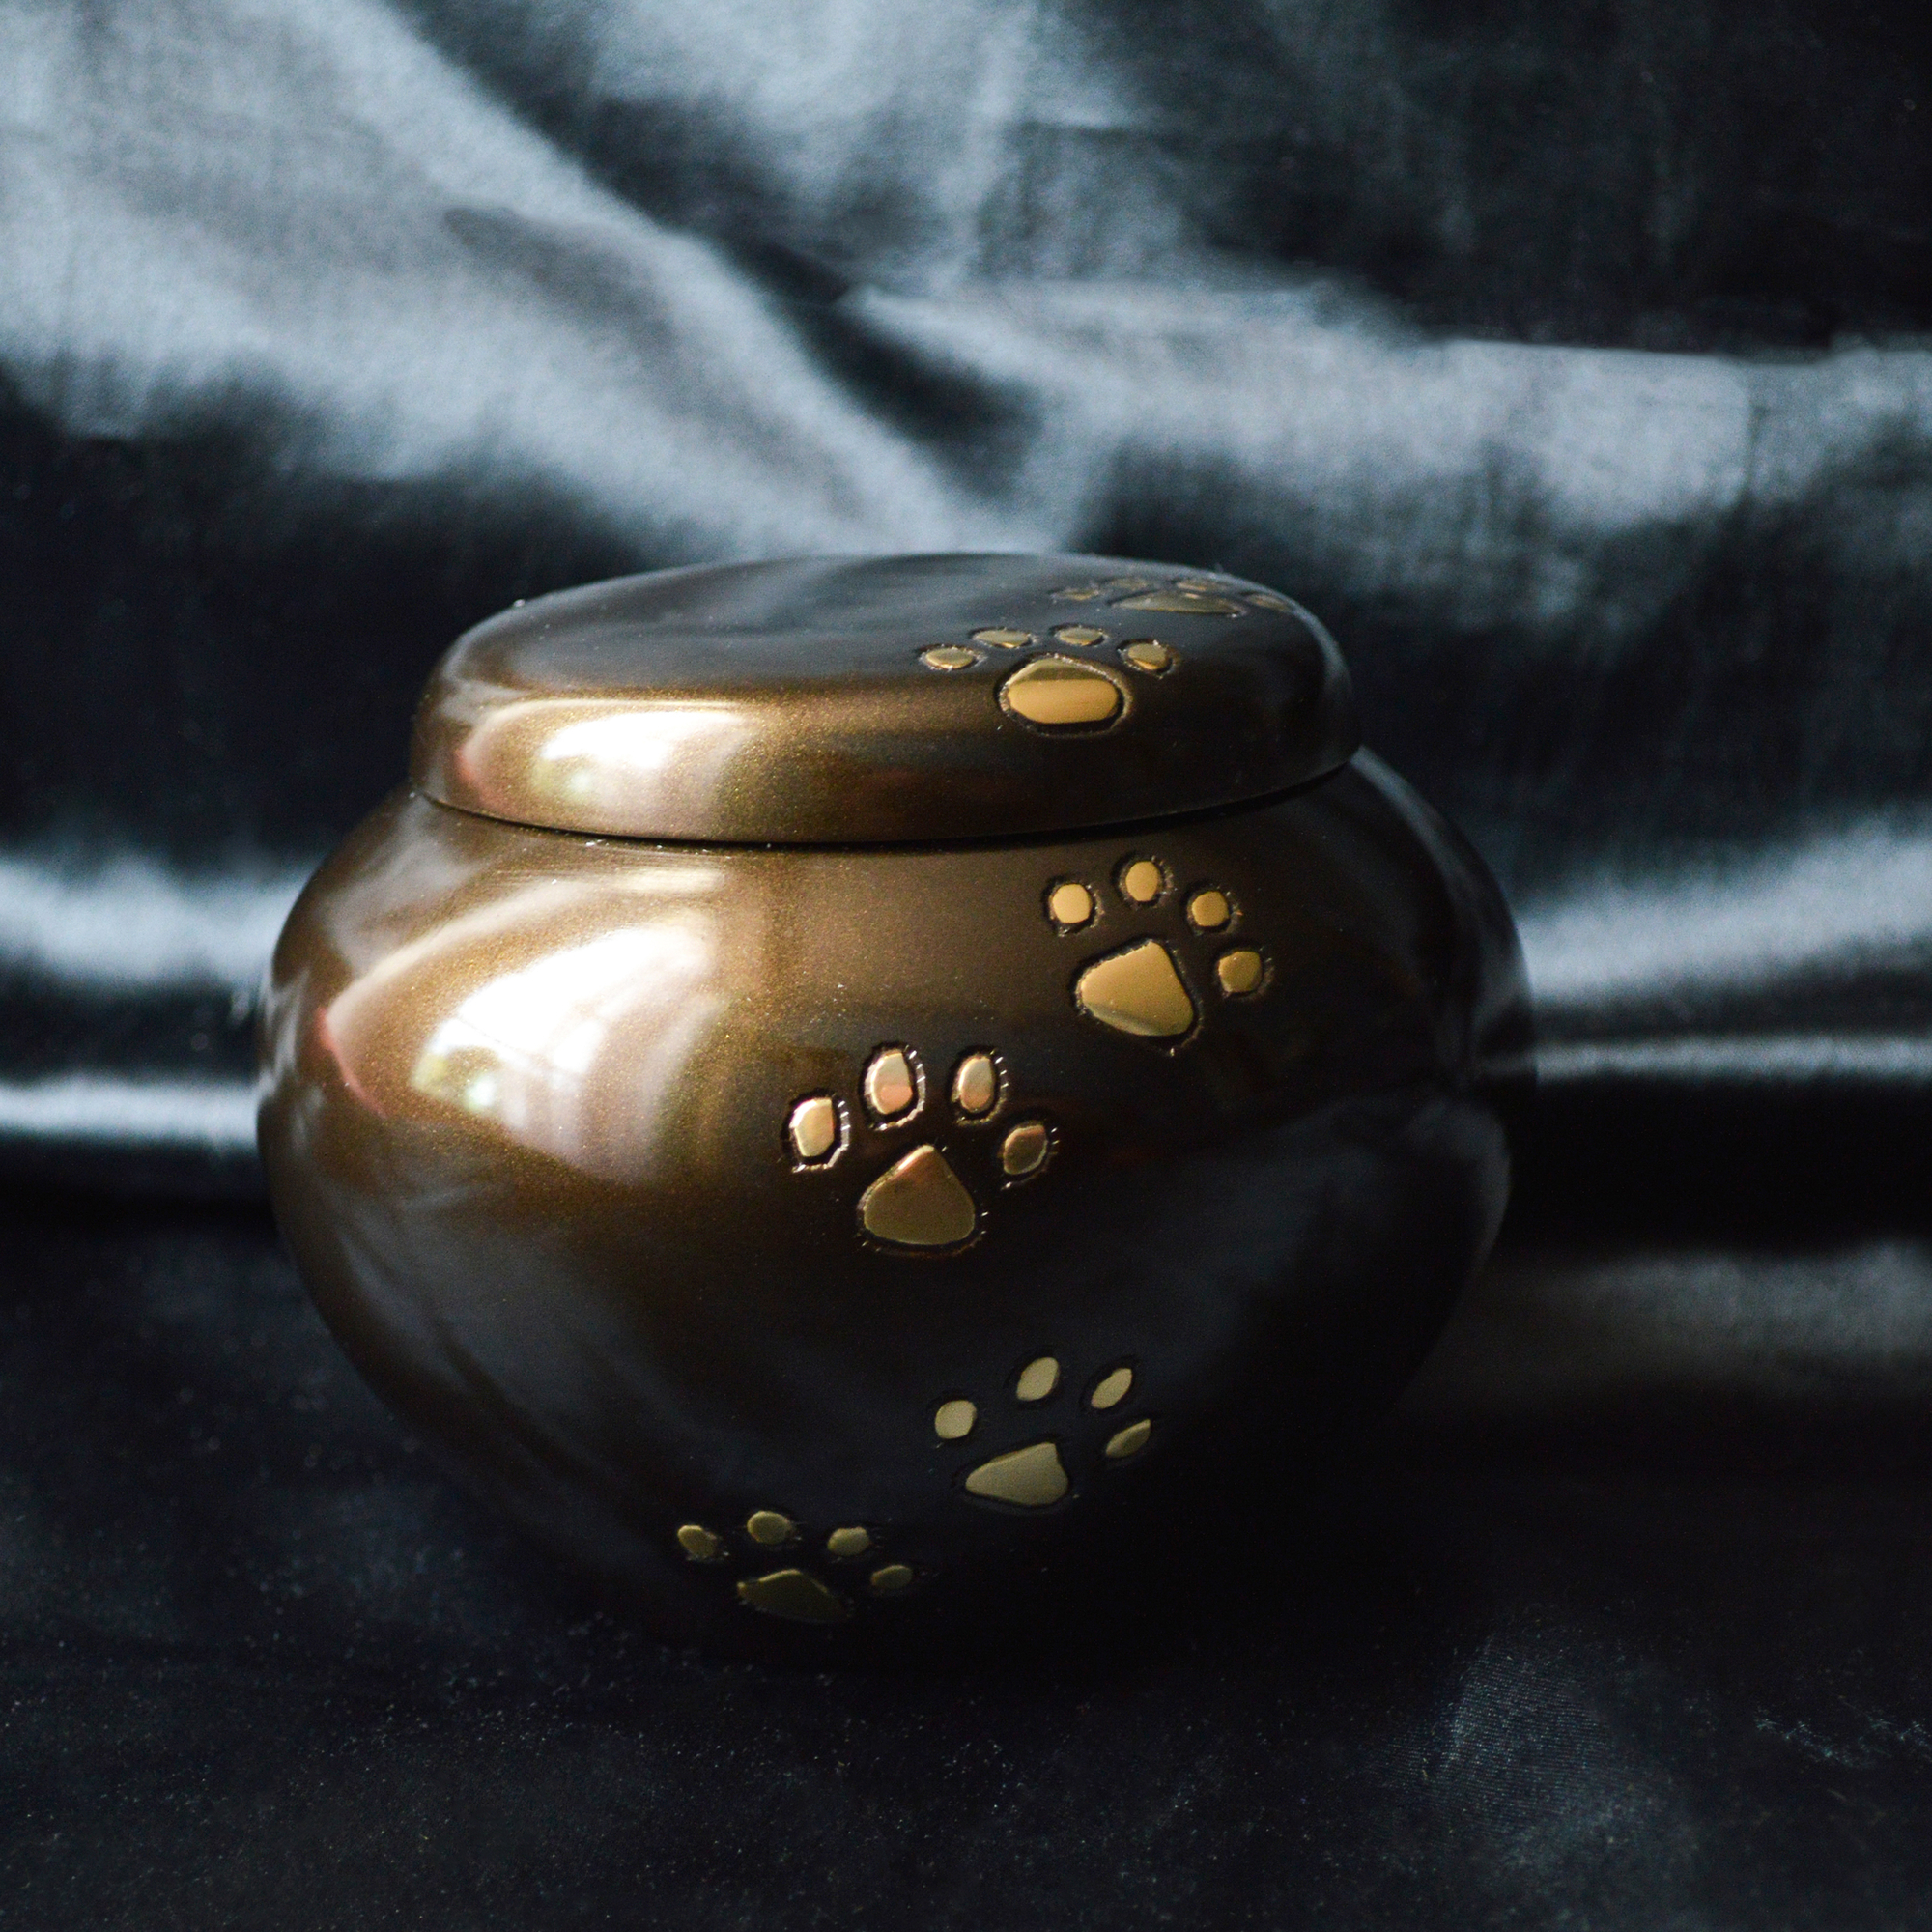 What You Should Know About Pet Cremation - Henderson-VanAtta-Stickle